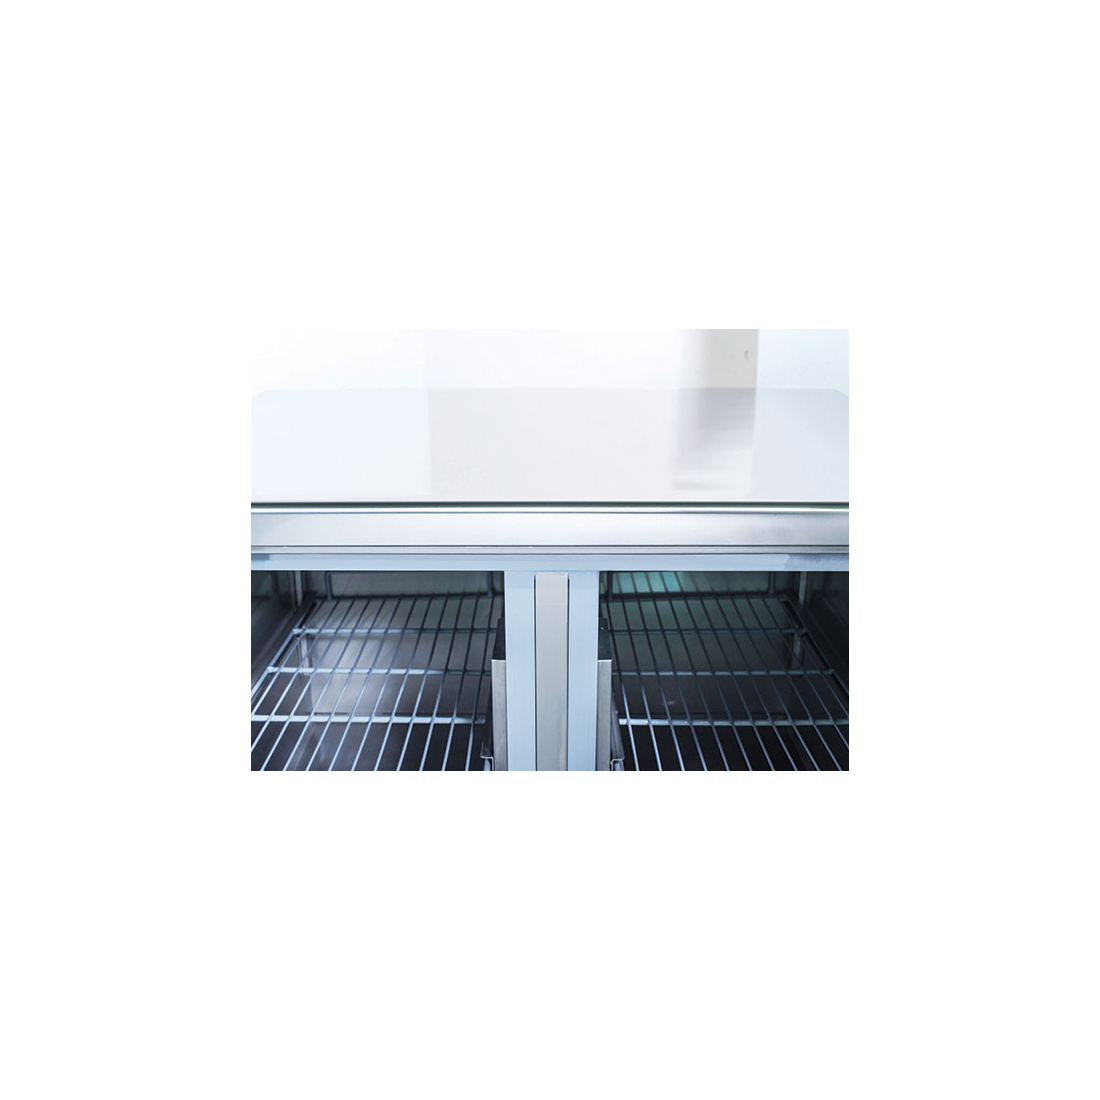 COOL HEAD ,CR 90A, Sandwich and Salad Prep Refrigerator with Two Doors and Sliding Top Cover|mkayn|مكاين